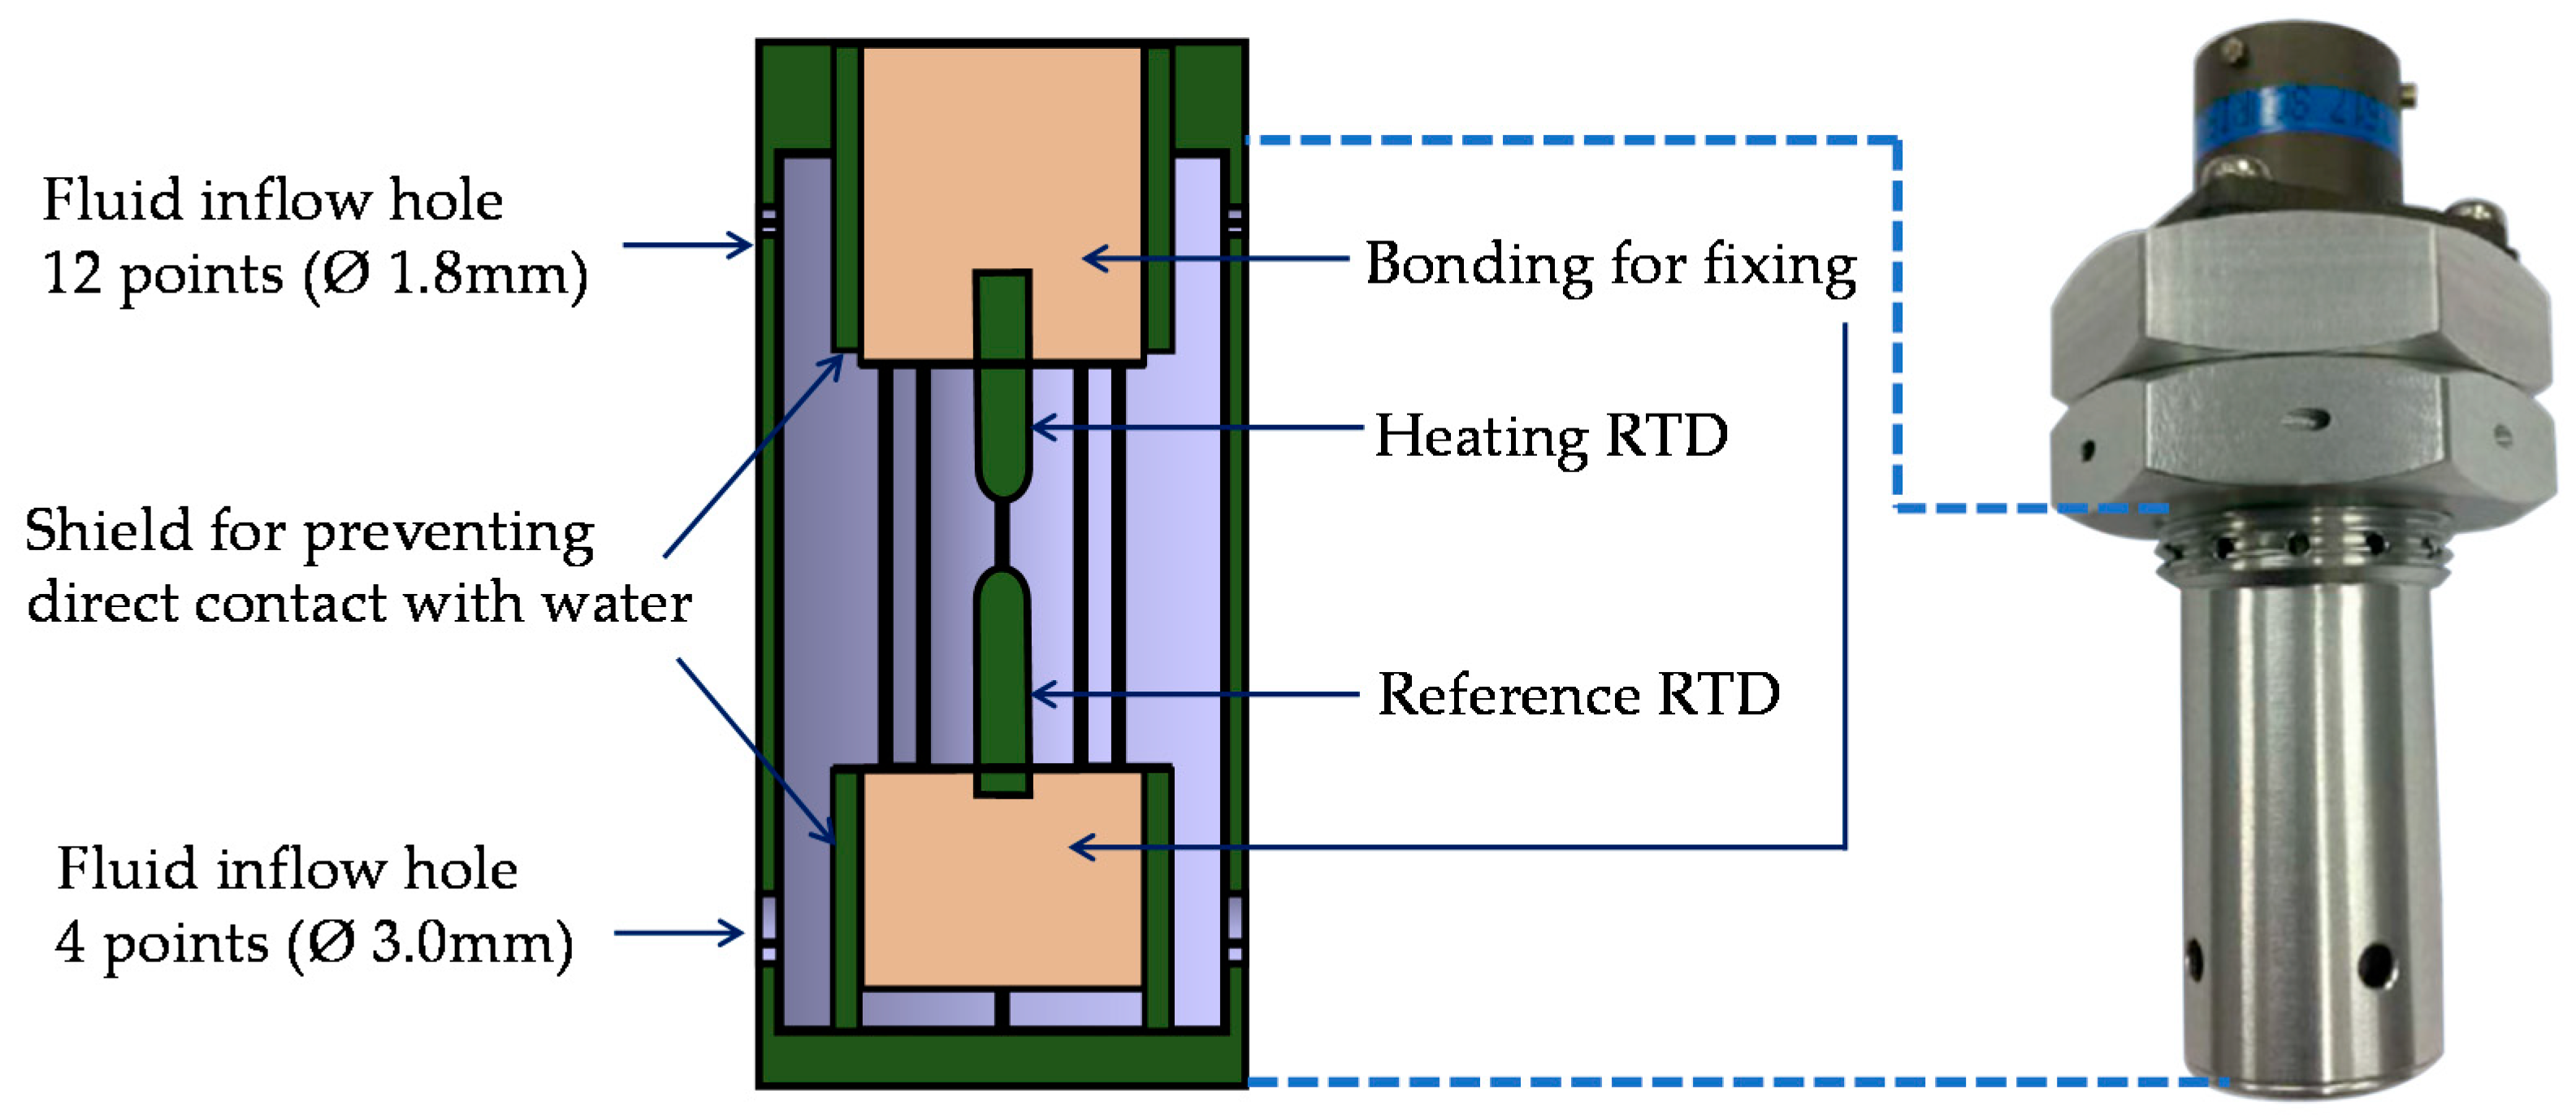 Resistance Temperature Detector or RTD, Construction and Working Principle